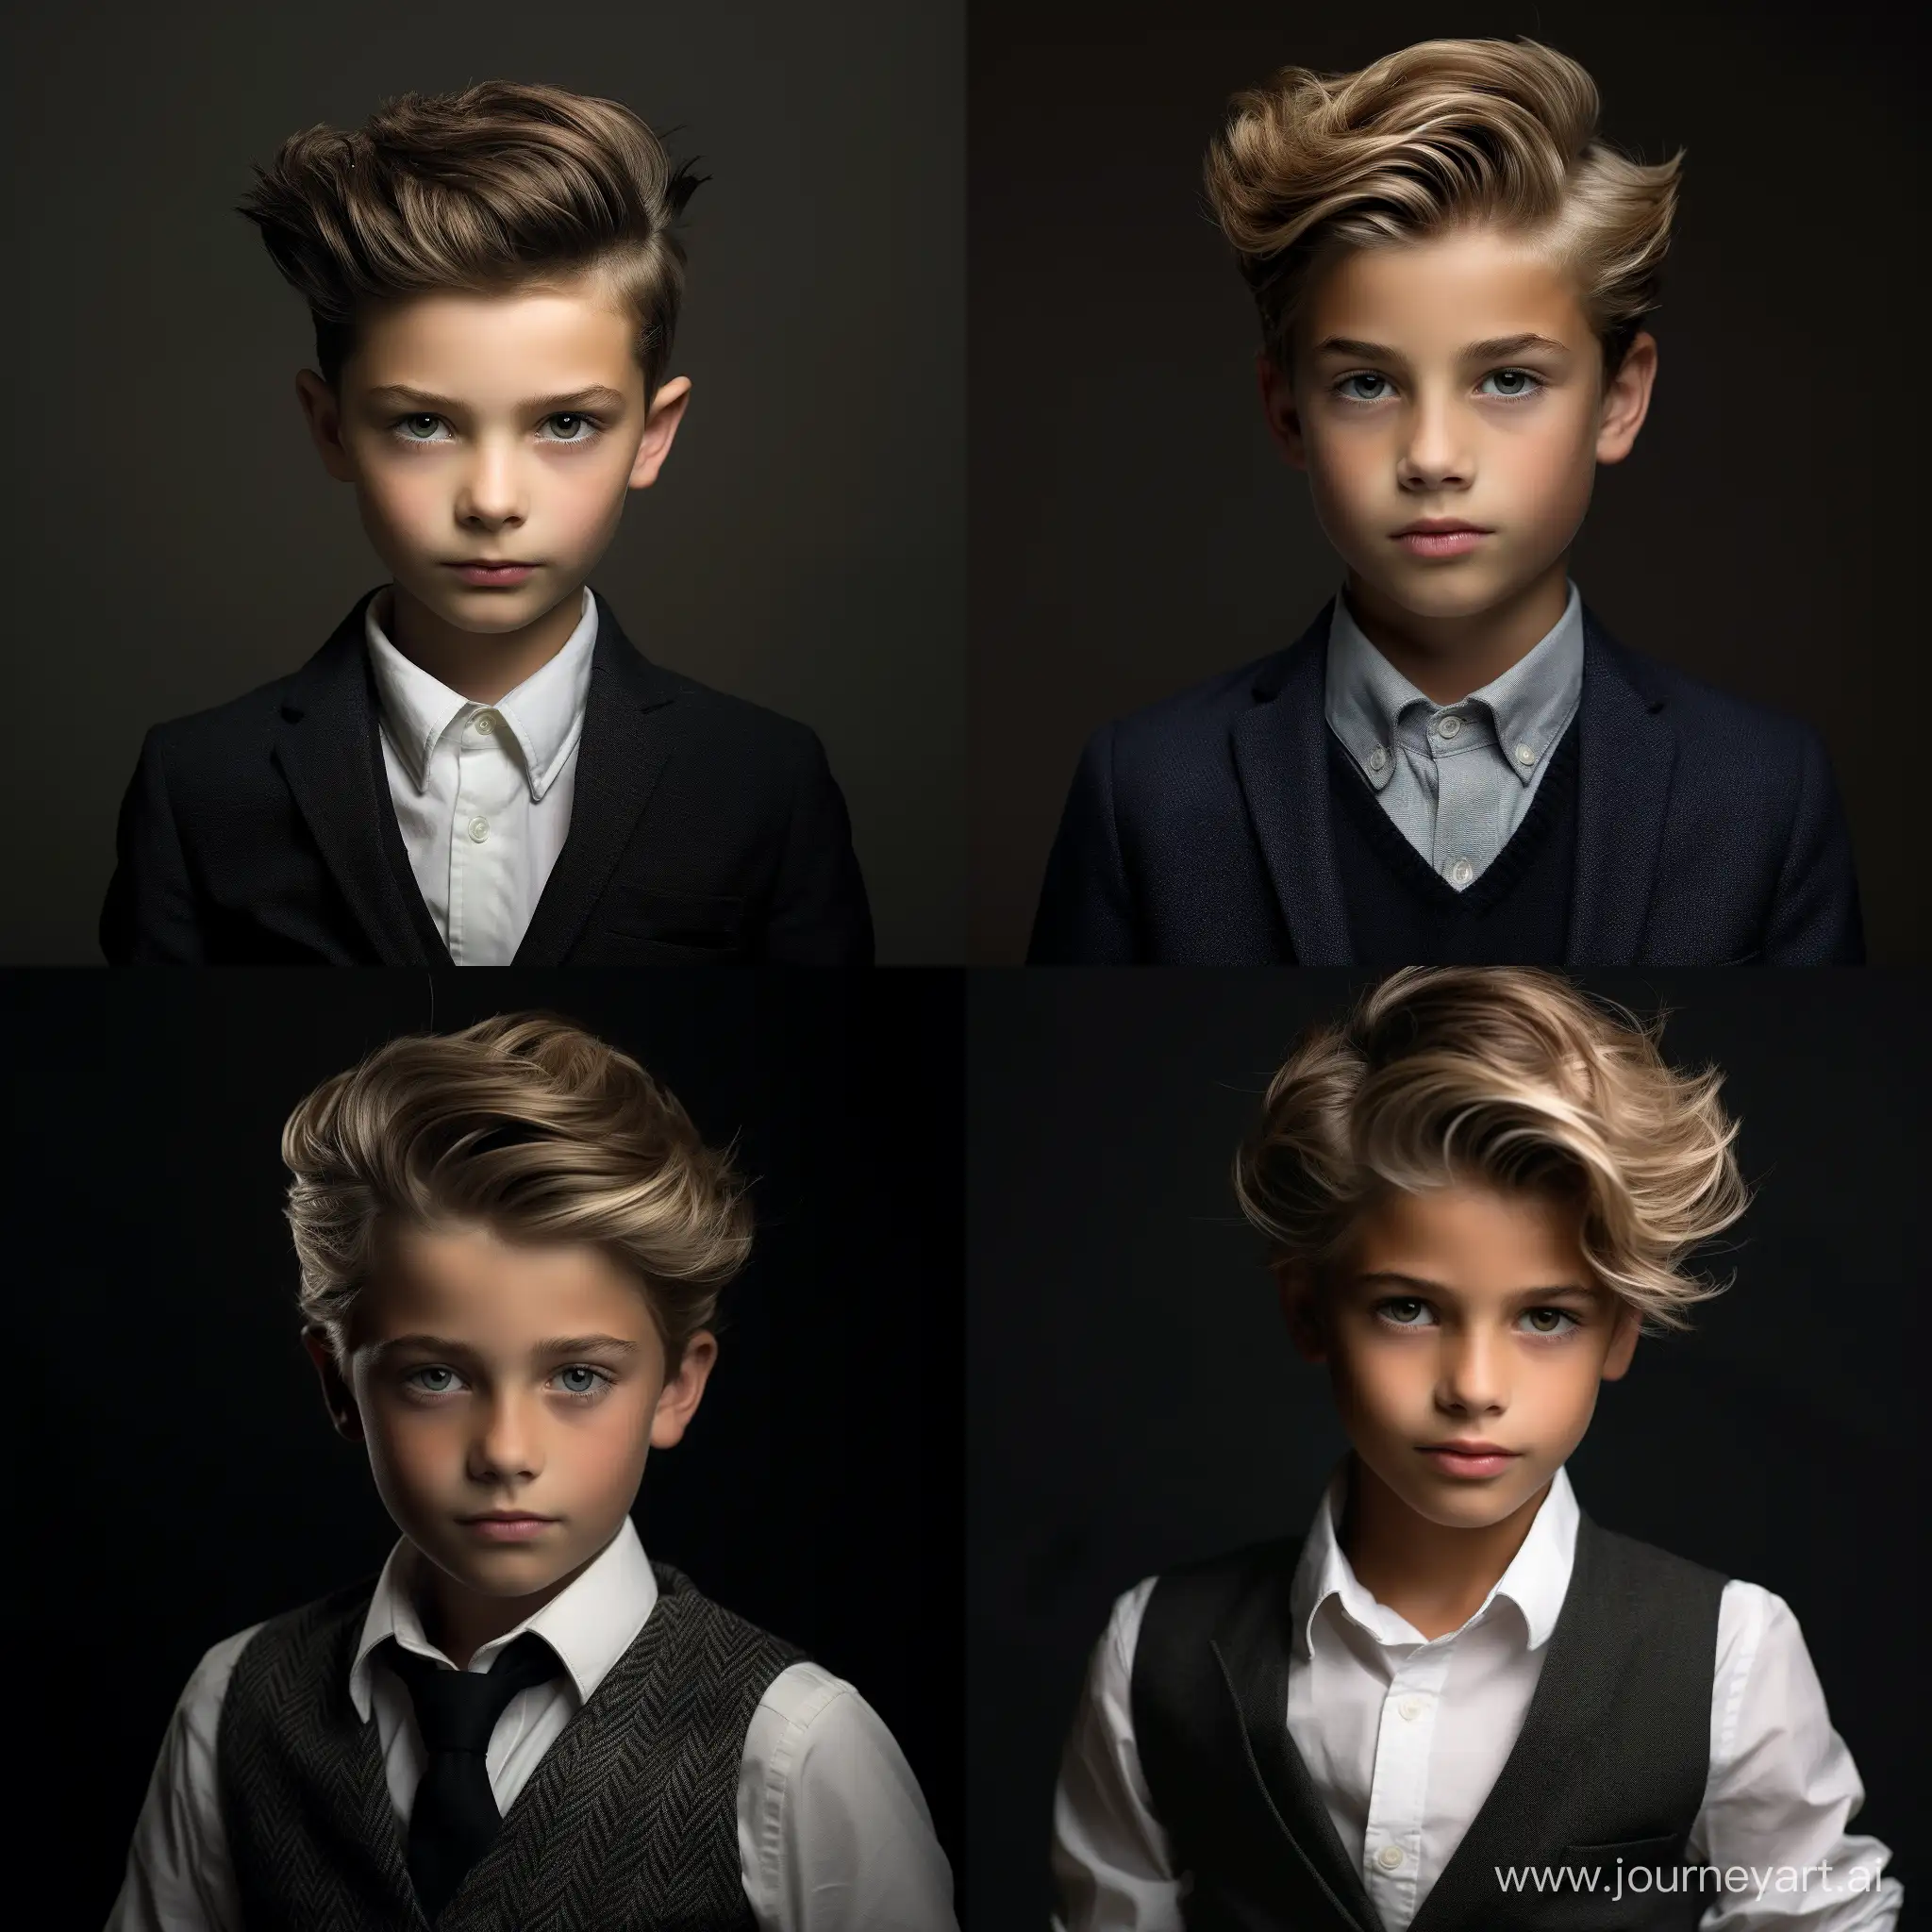 Studio photo of a ten-year-old boy with neatly styled hair. Dark background.